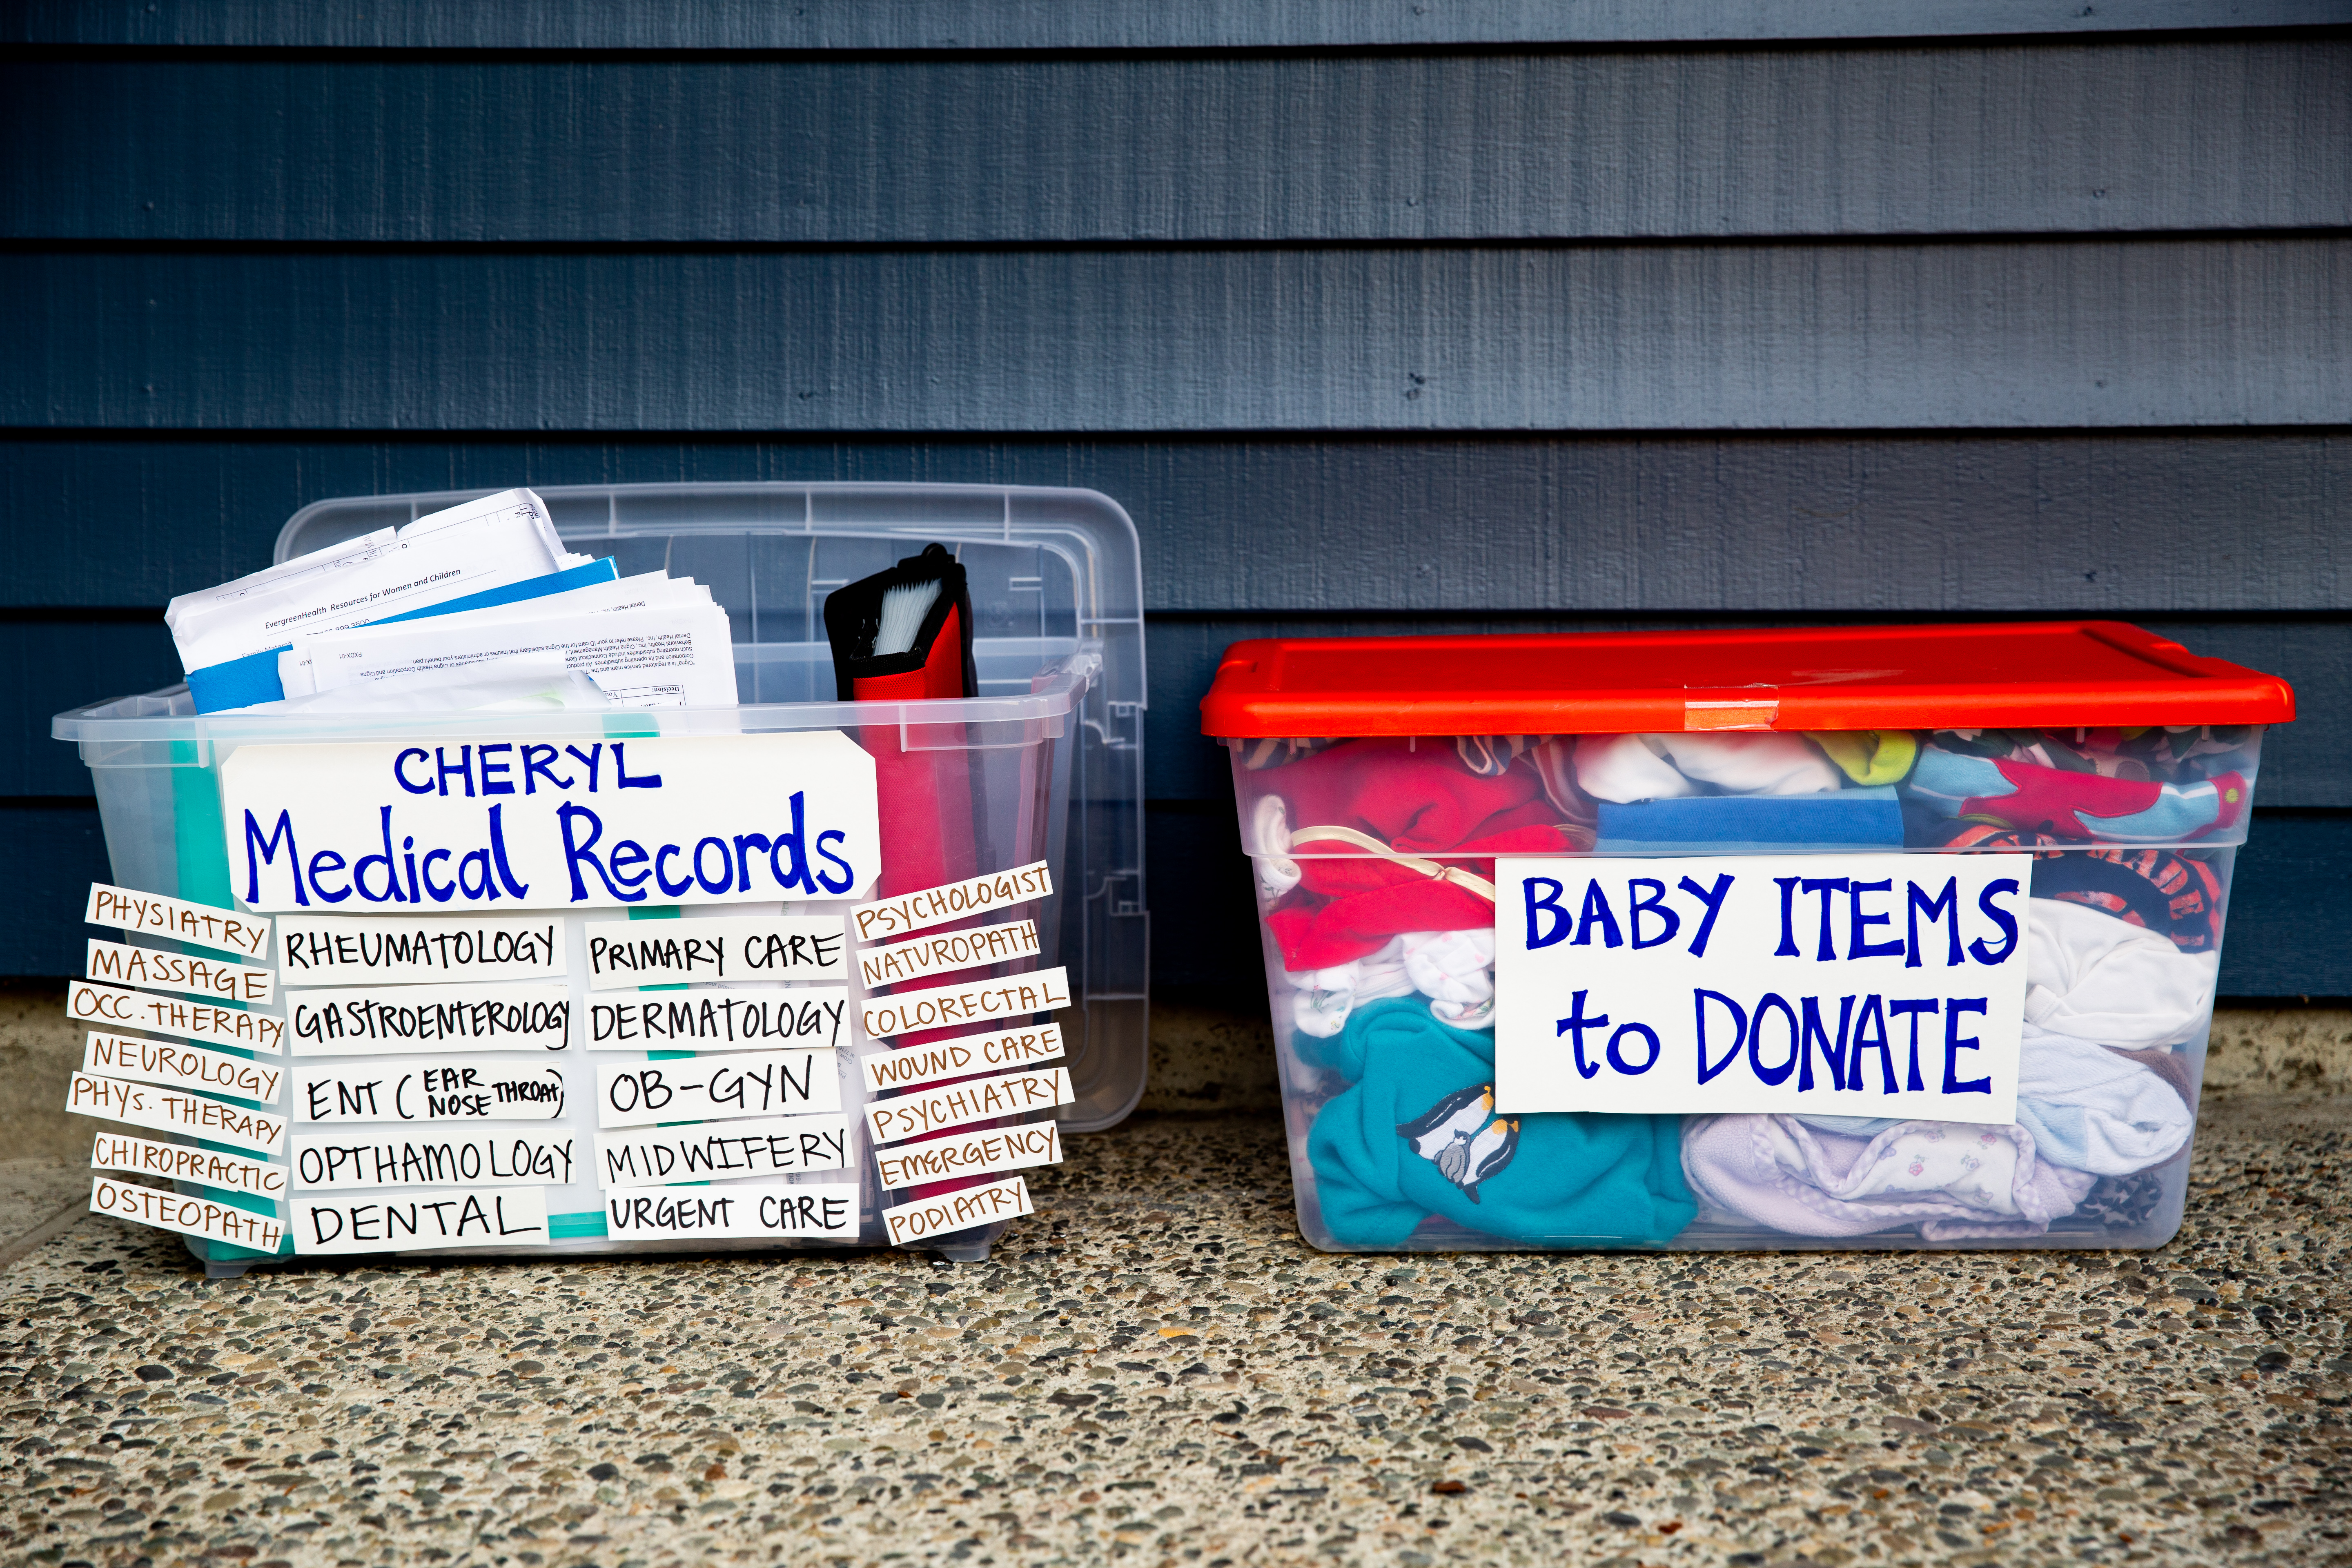 On the left is a box entitled "Cheryl medical records," which lists 18 different medical specialties. On the right is a box called "Baby items to donate."